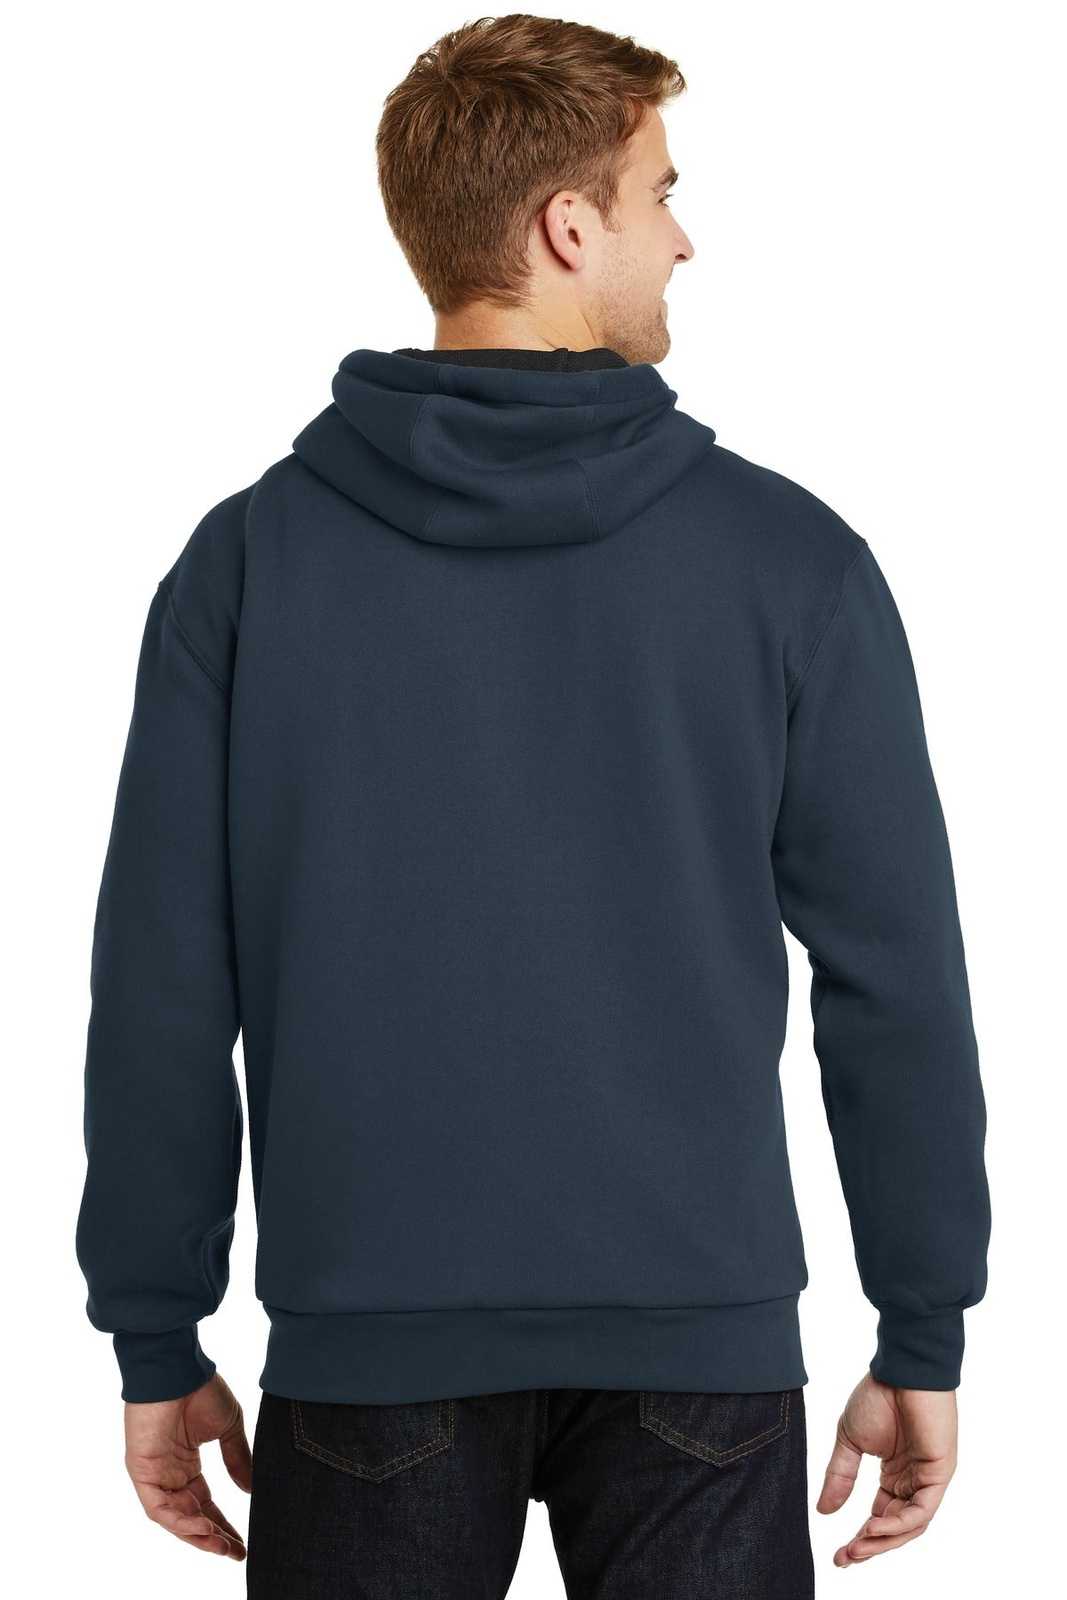 CornerStone CS620 Heavyweight Full-Zip Hooded Sweatshirt with Thermal Lining - Navy - HIT a Double - 1